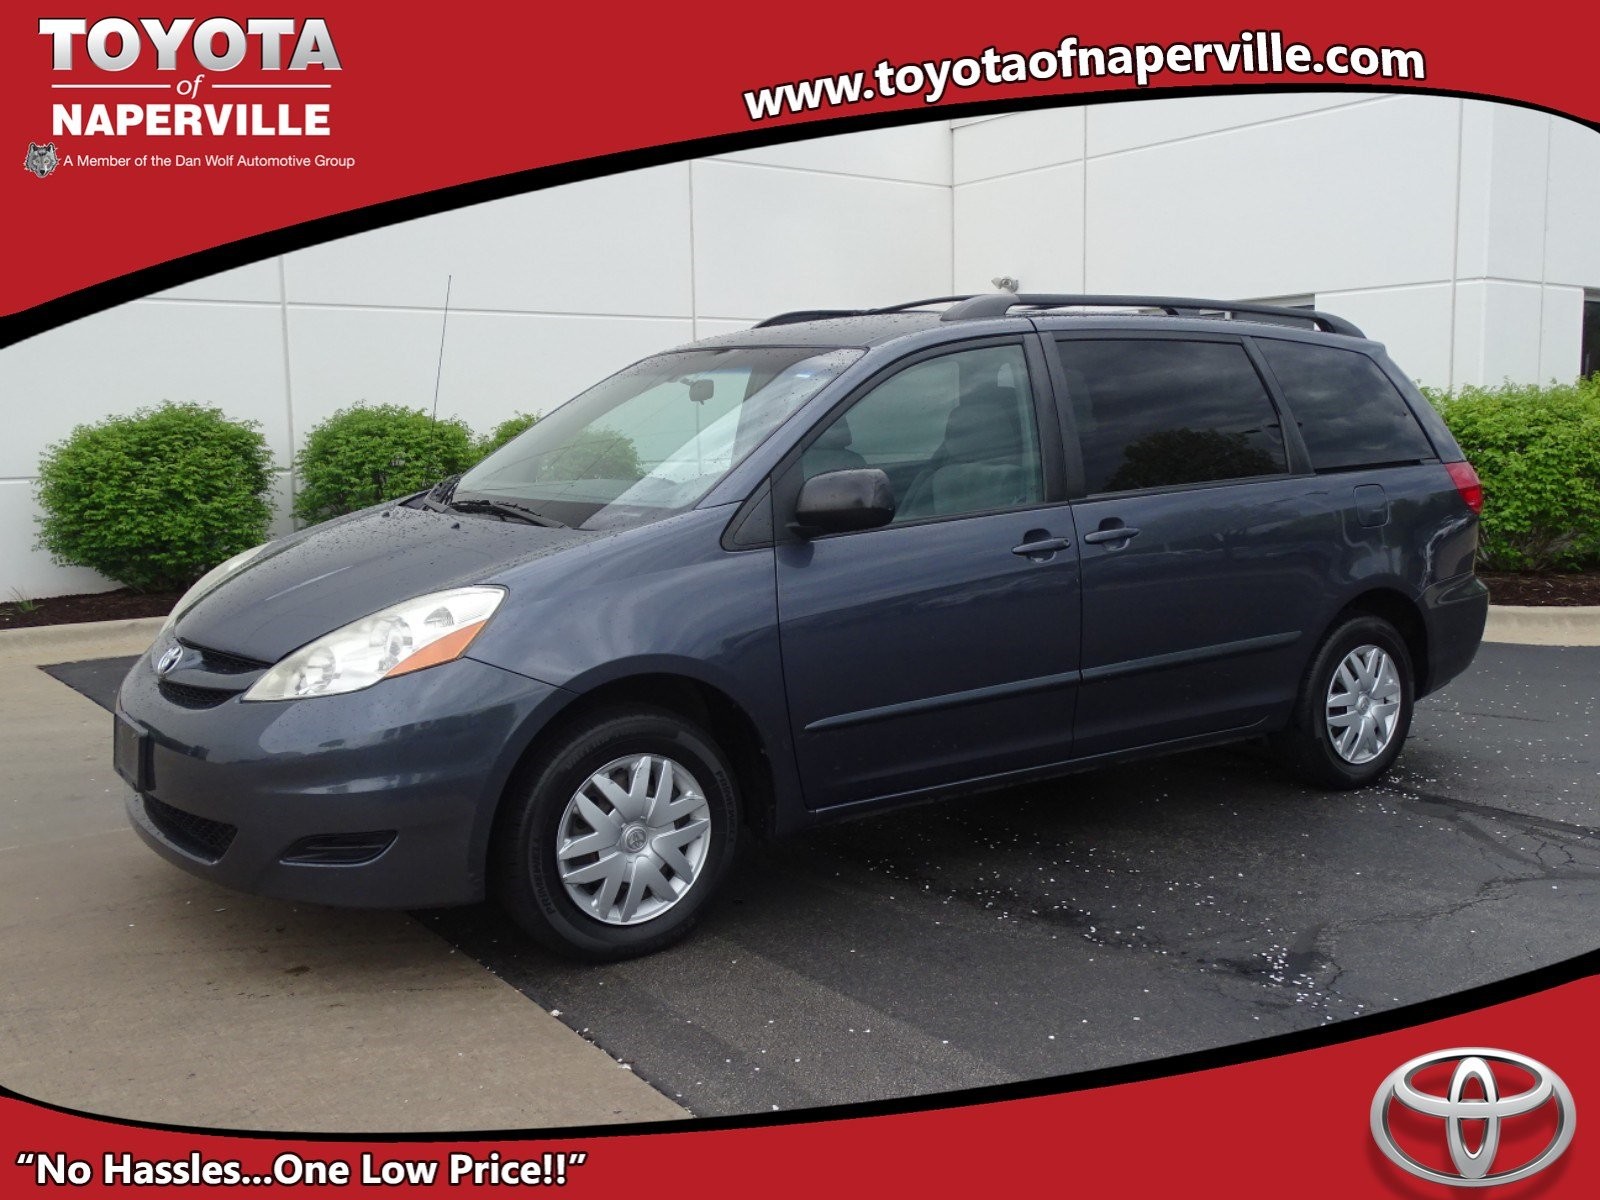 2006 toyota Sienna Parts Diagram Pre Owned 2006 toyota Sienna Le 4d Passenger Van In Naperville Of 2006 toyota Sienna Parts Diagram